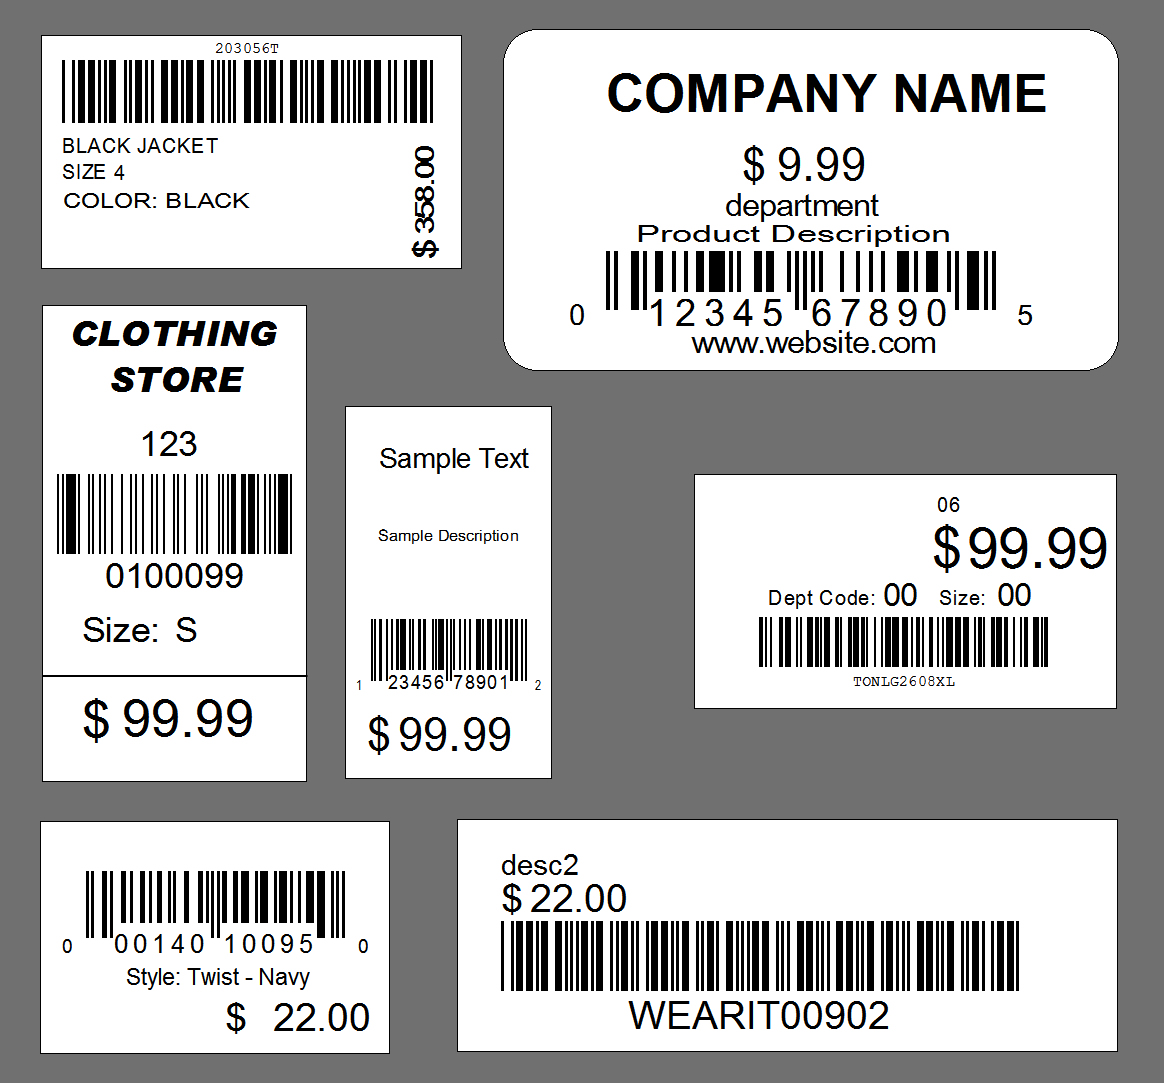 Barcode Labels & Tags.